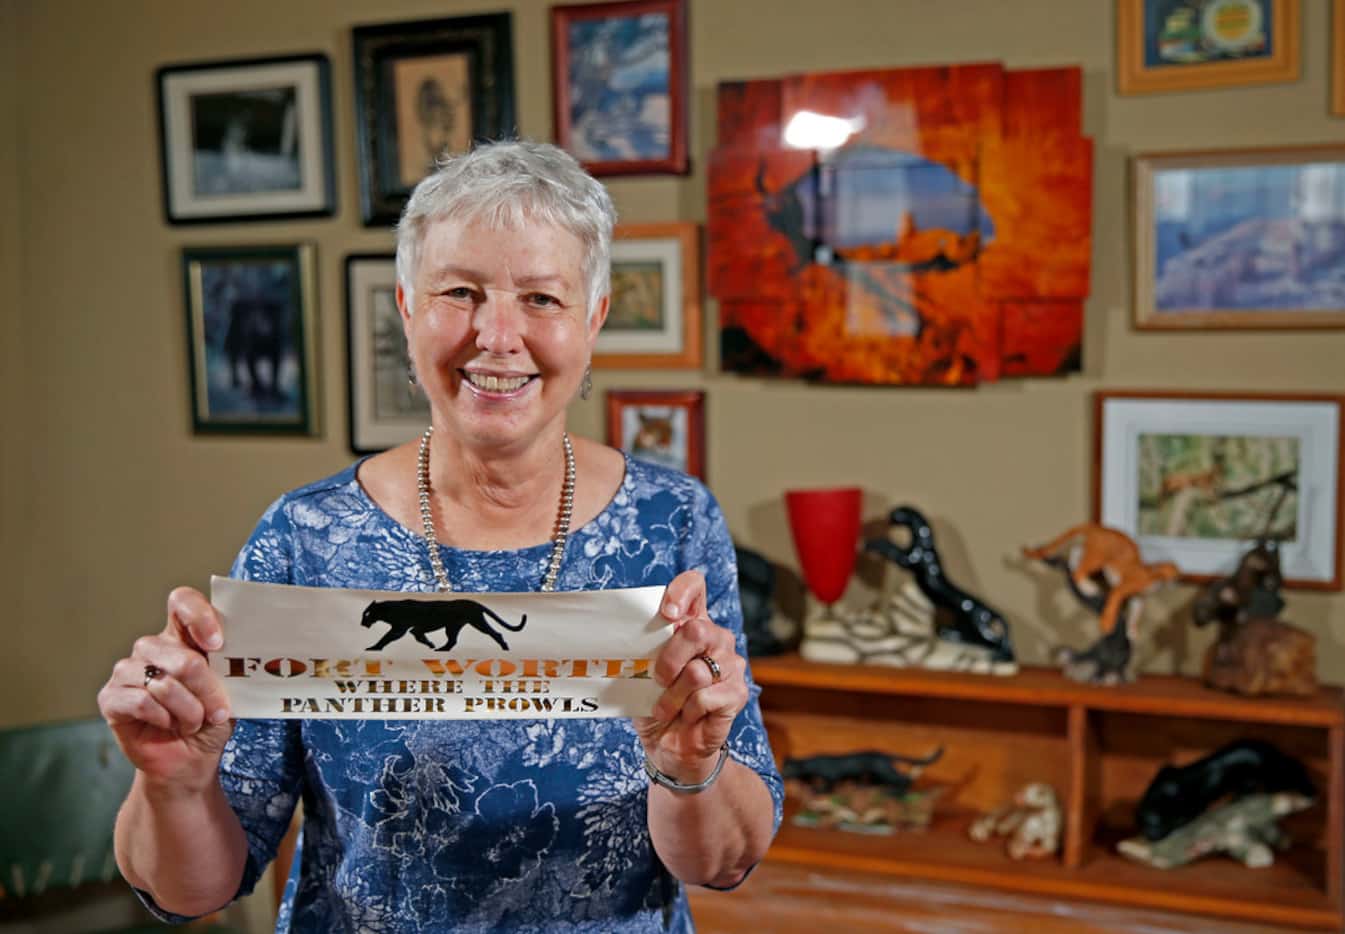 Tarrant County historian Carol Roark poses for a photograph with Larry Schuessler's Panther...